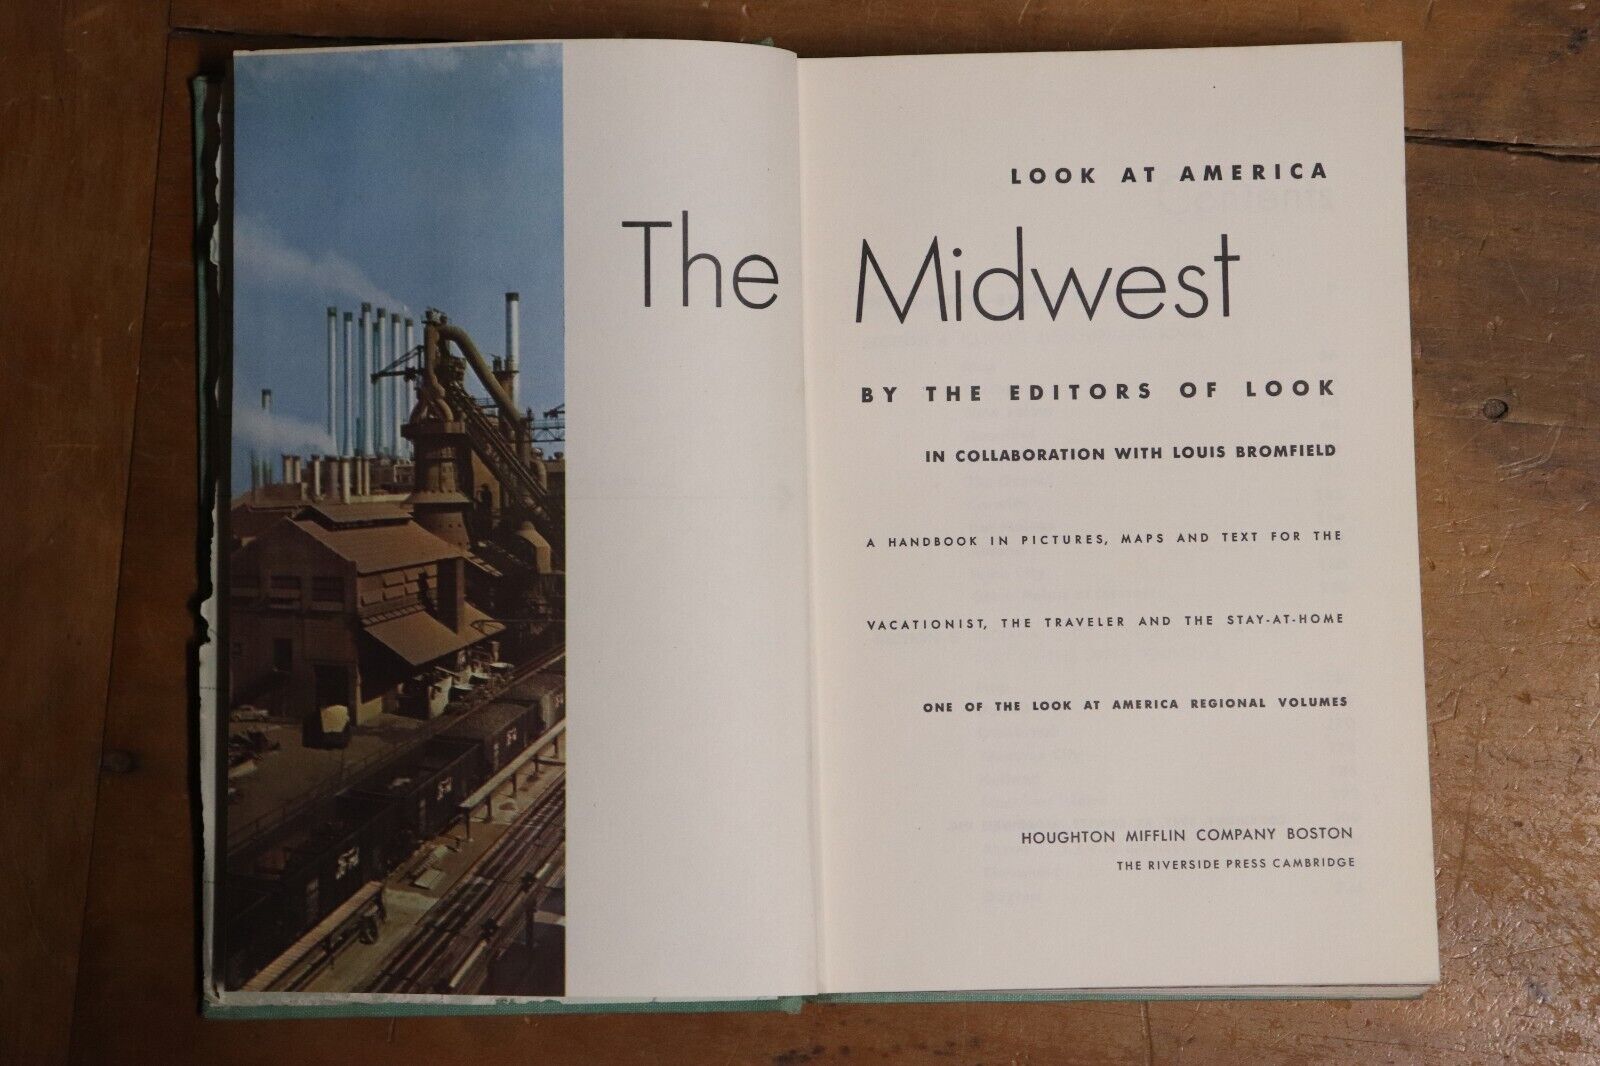 Look at America: The Midwest - 1947 - 1st Edition Vintage Book